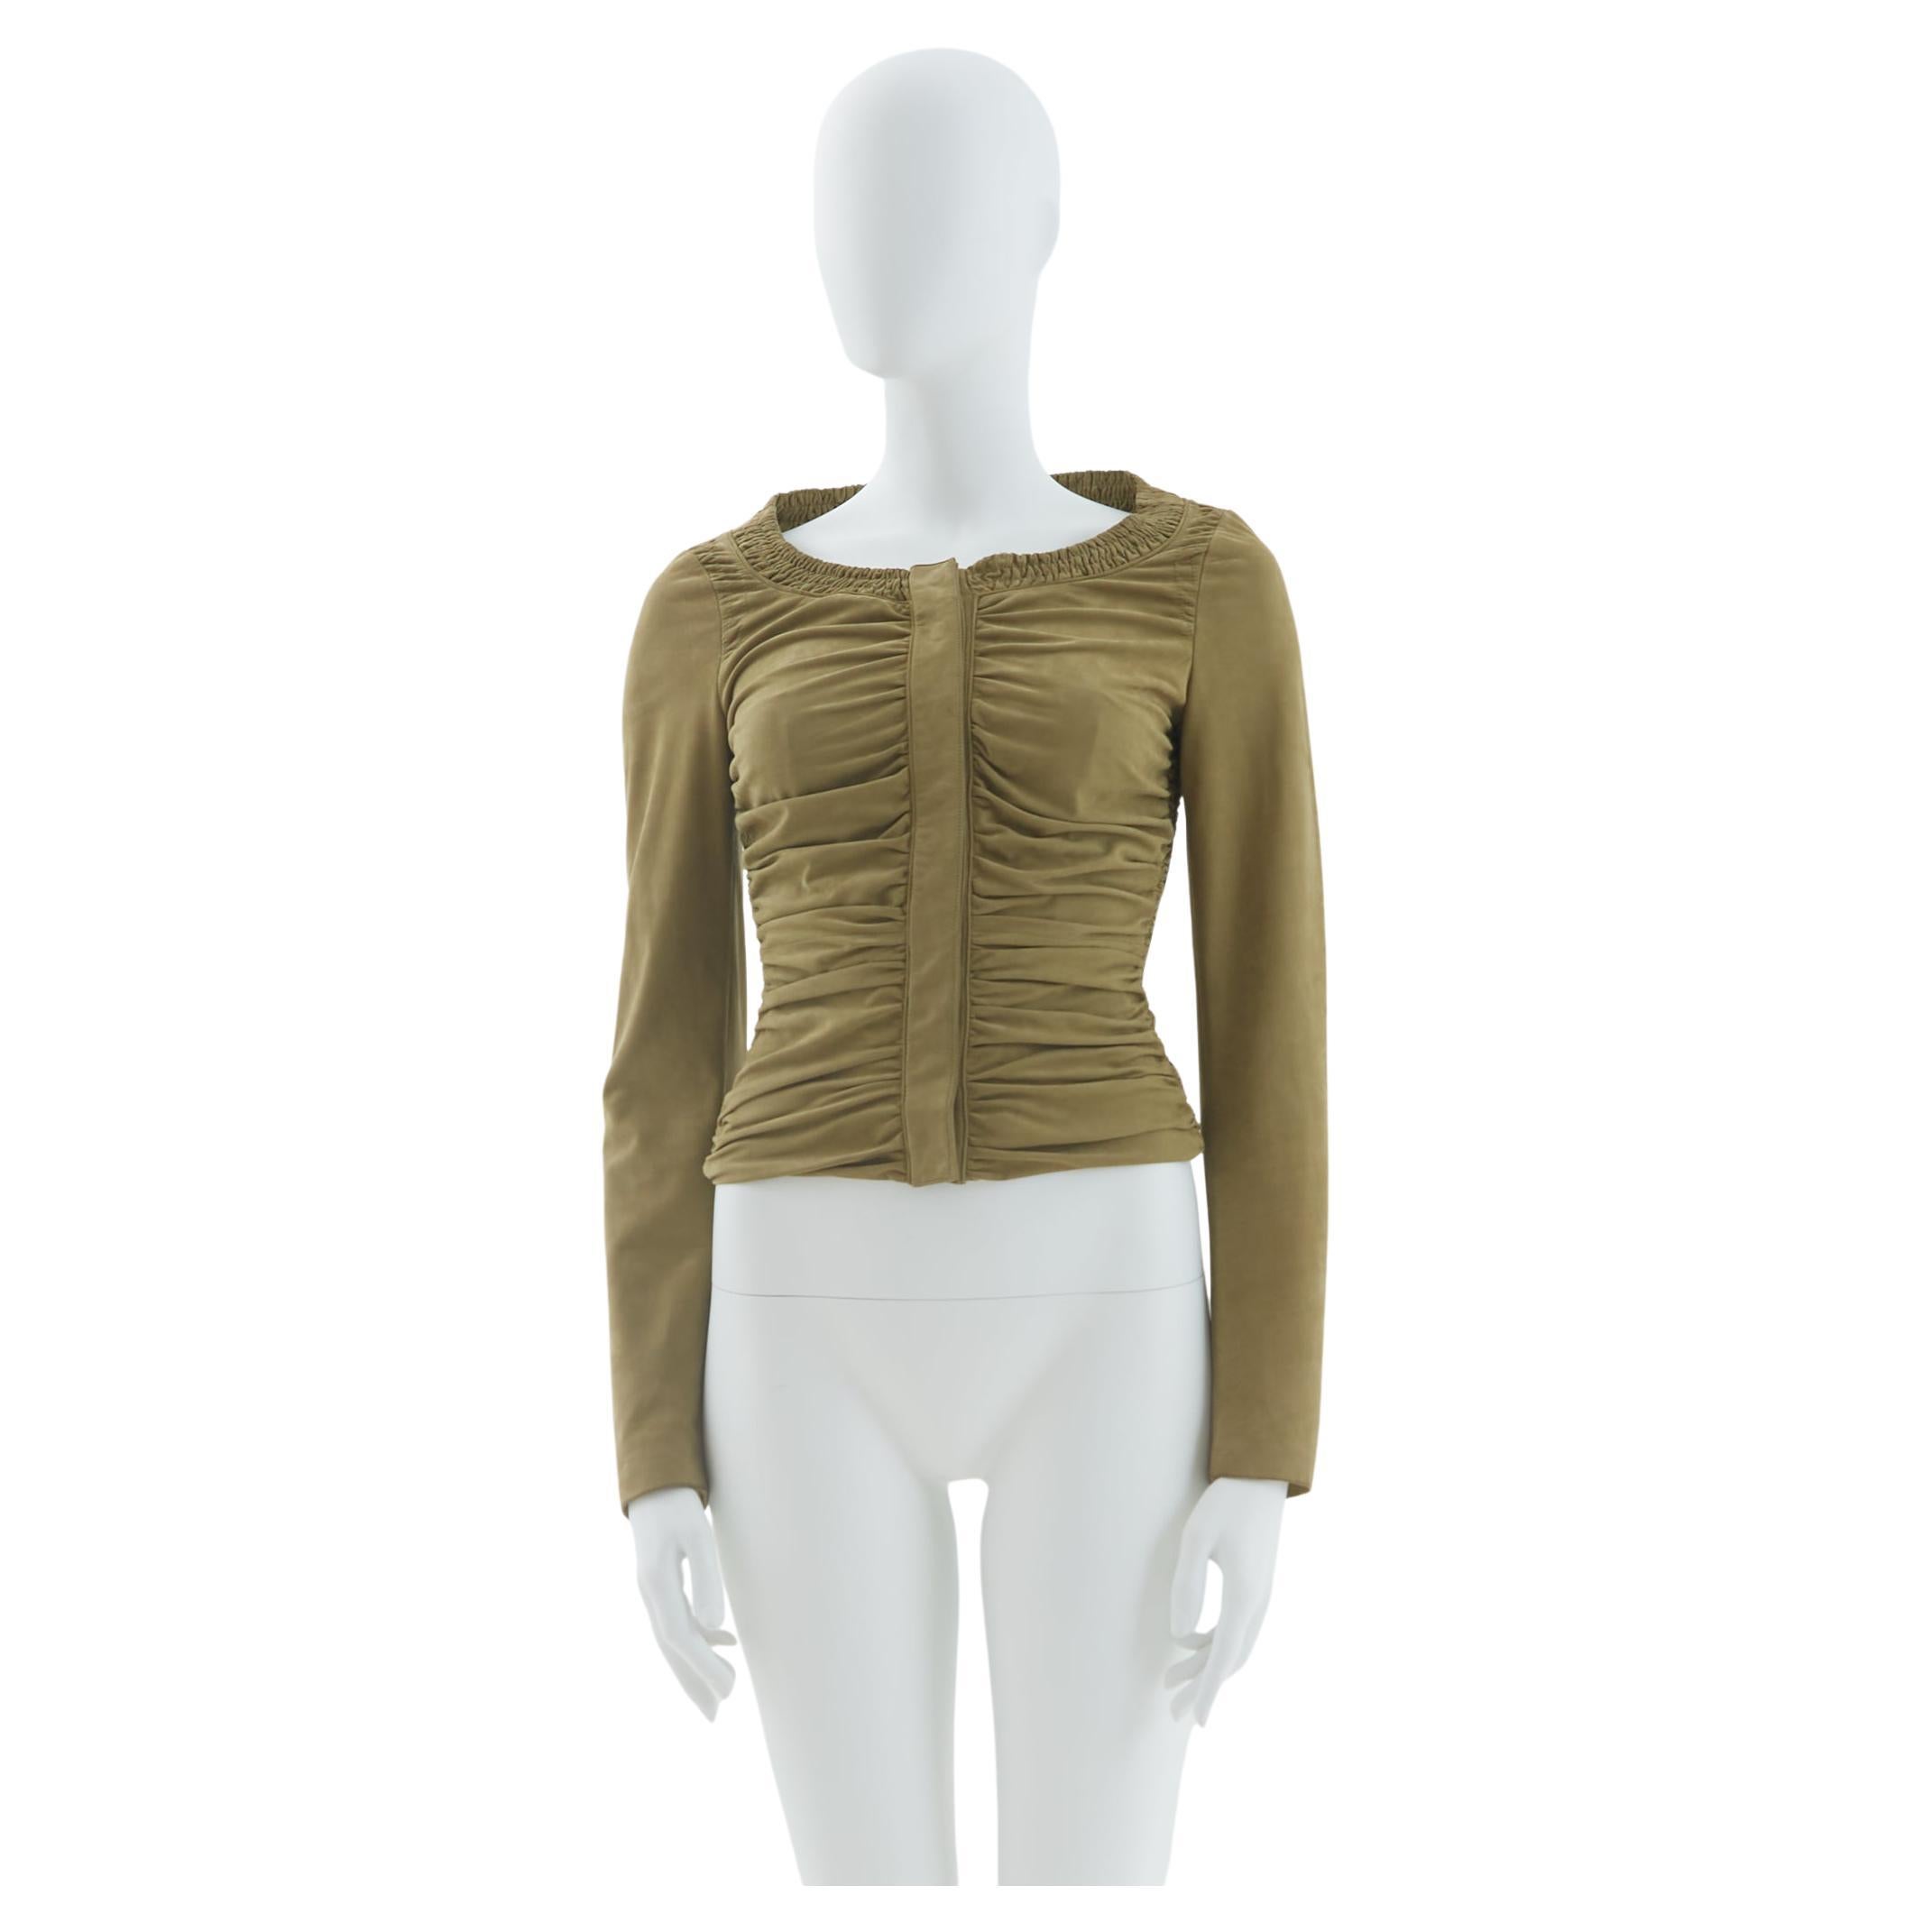 Gucci S/S 2003 Ruched suede leather jacket top